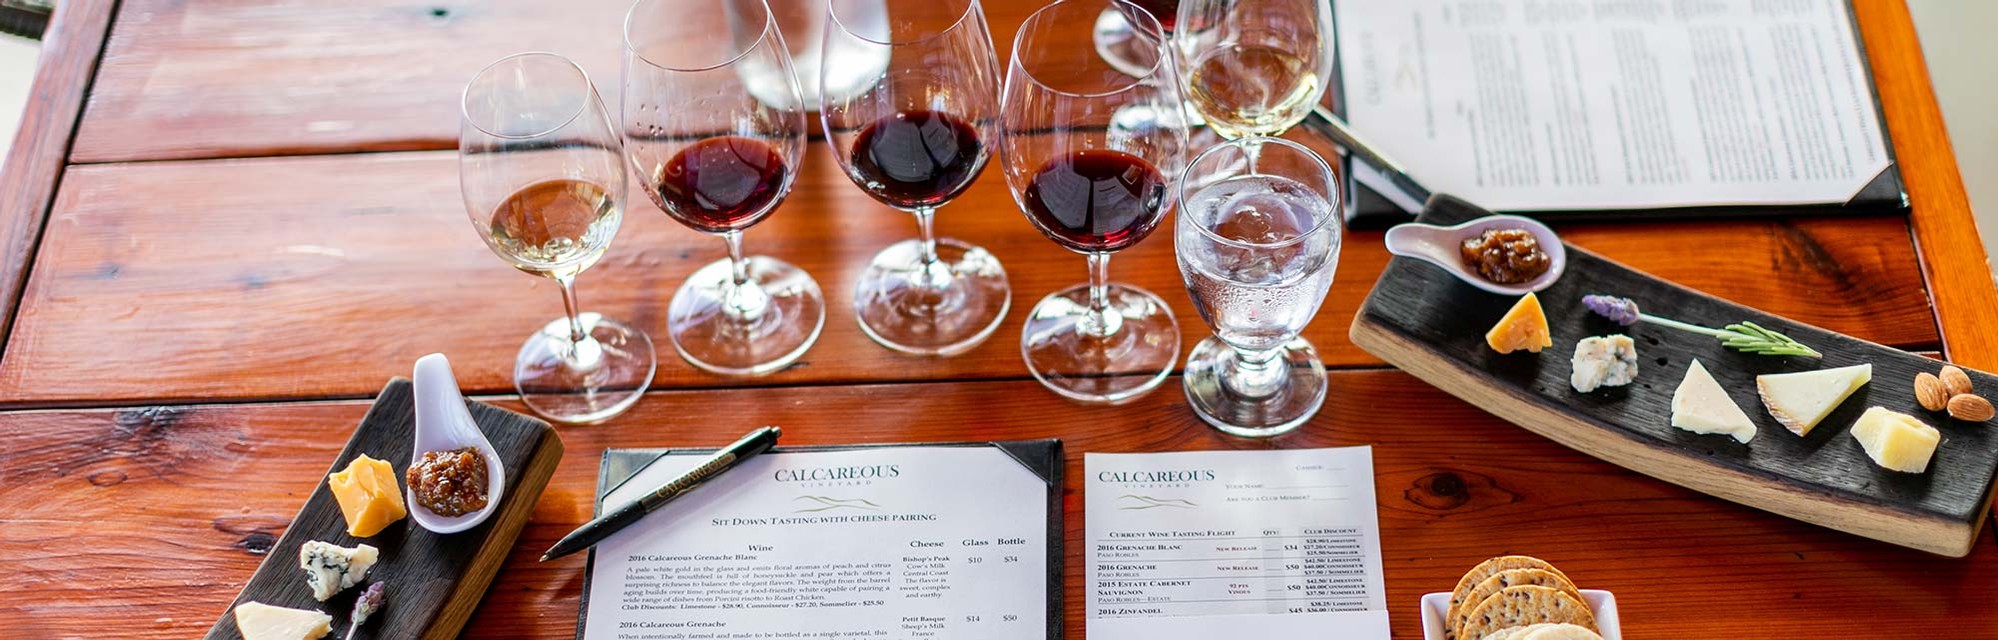 Wine tasting at Calcareous Vineyard in Paso Robles